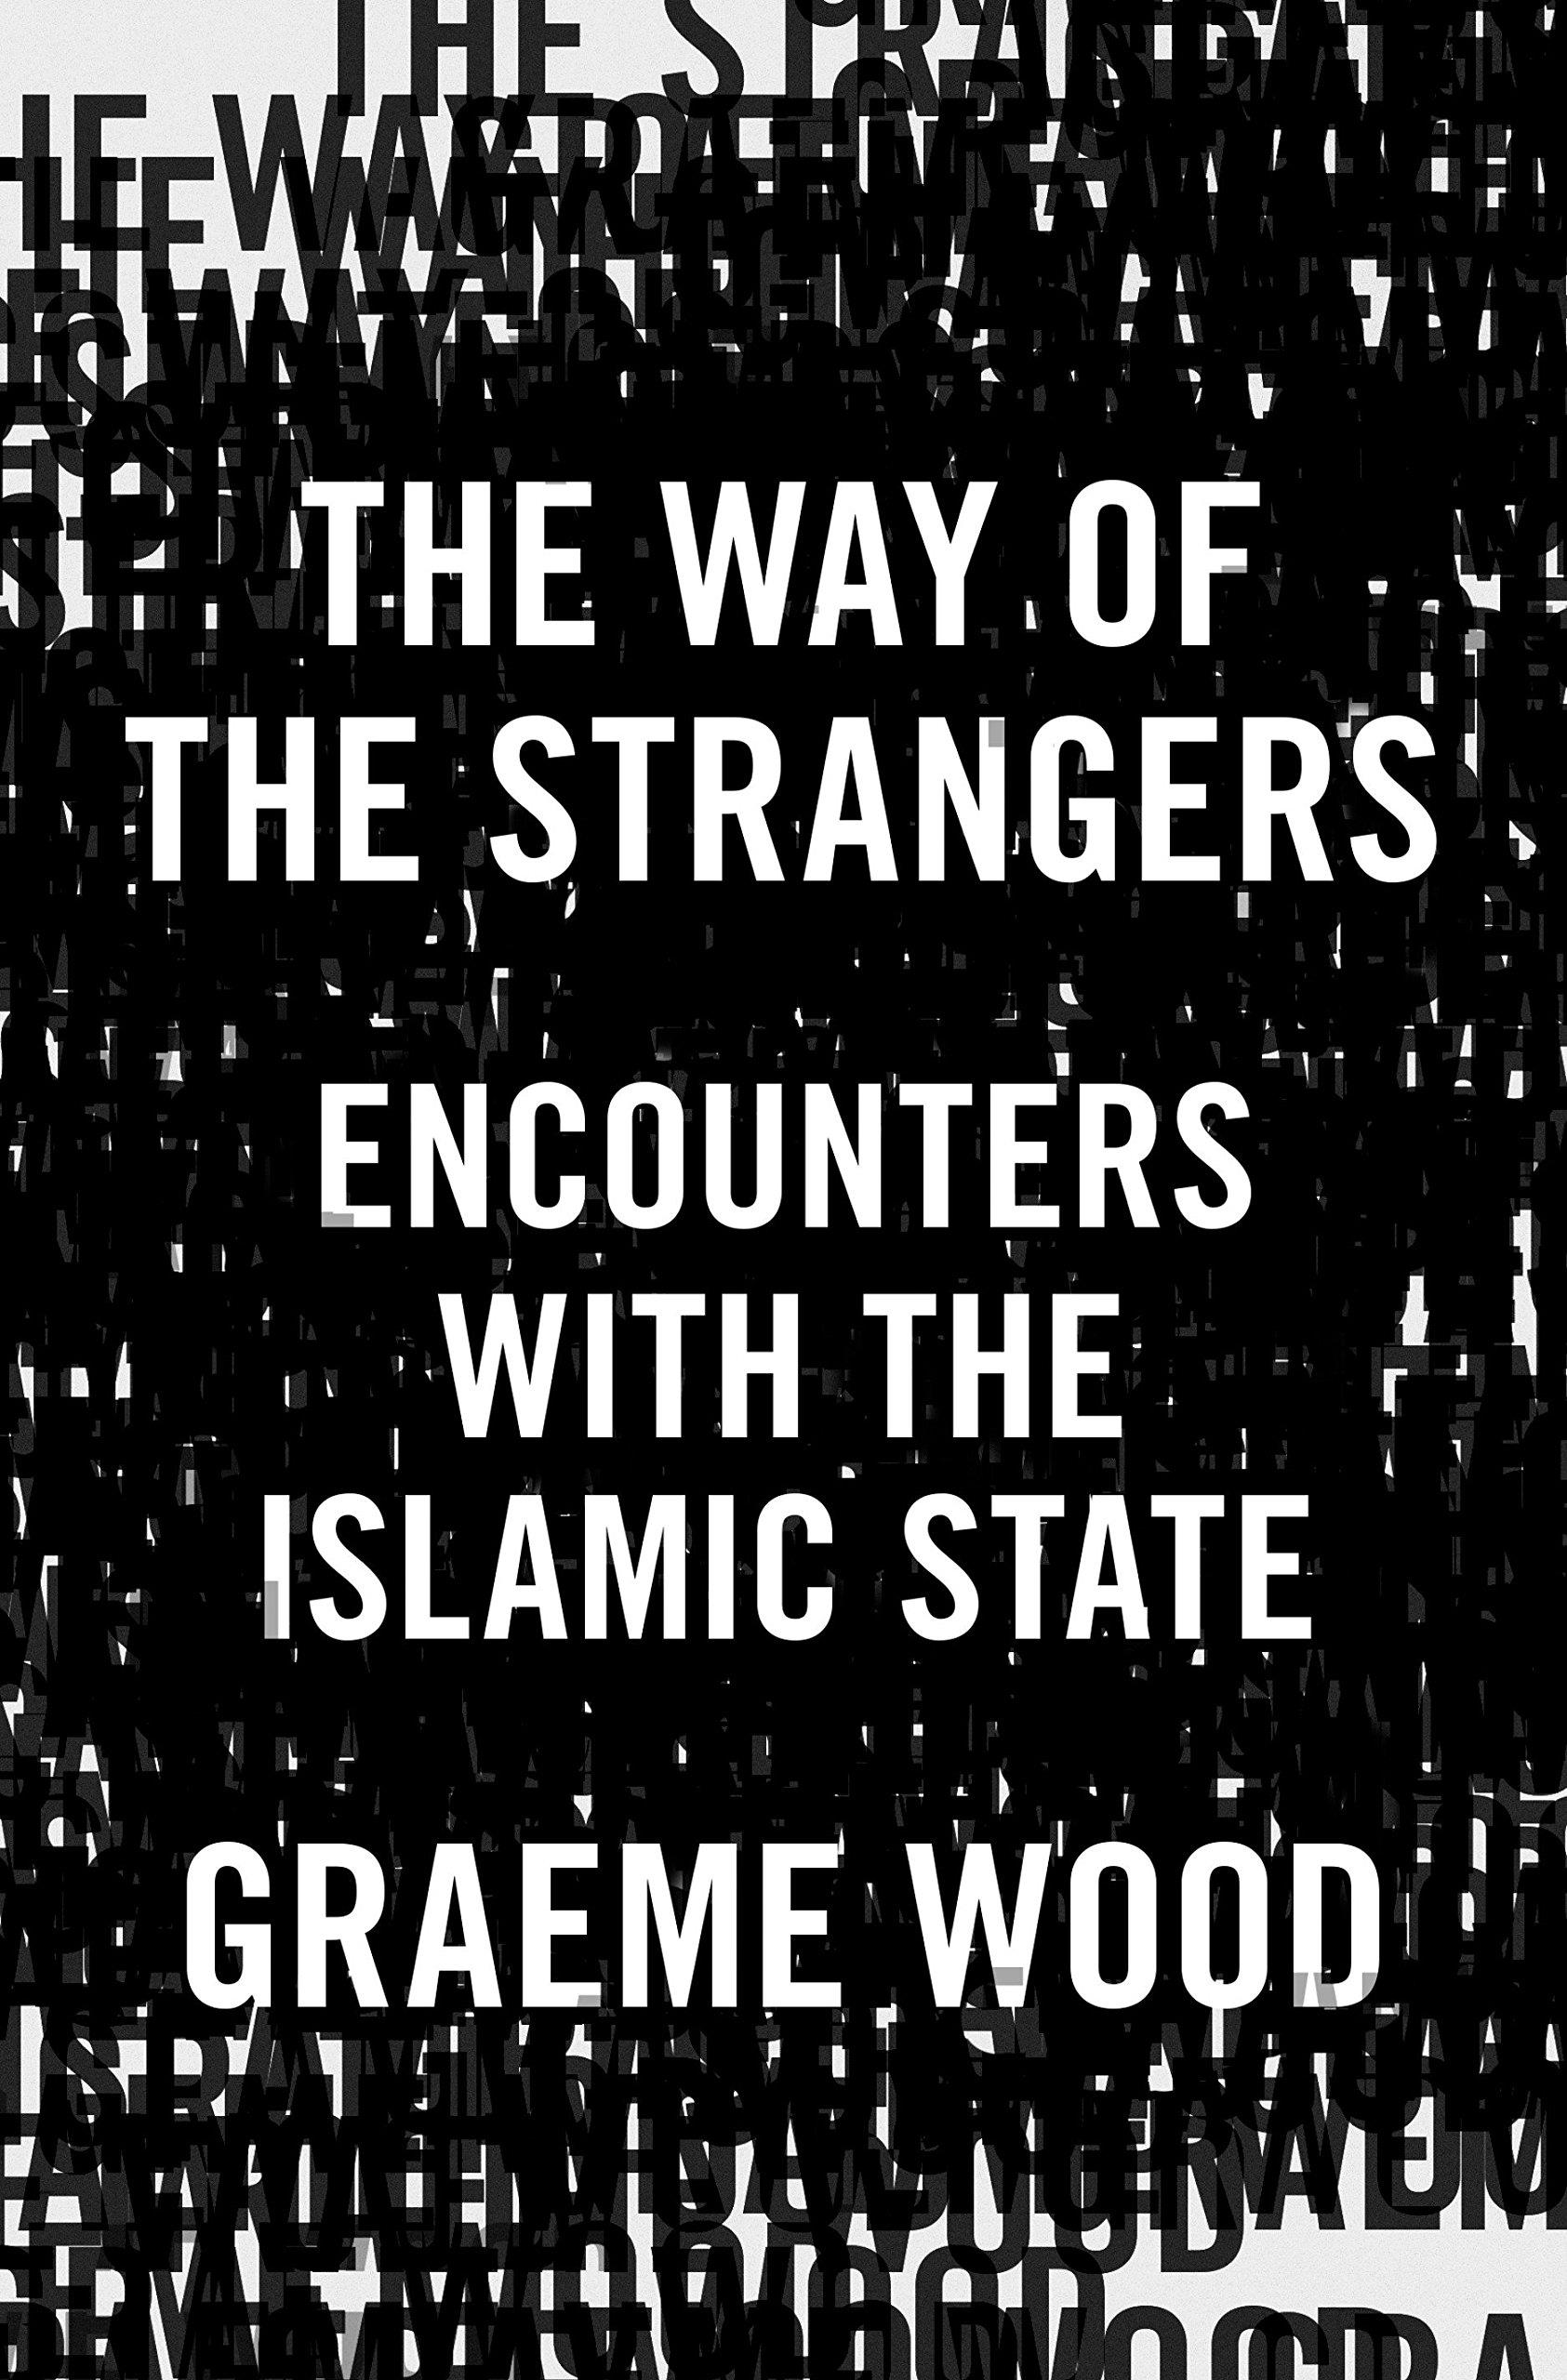 The way of the strangers : encounters with the Islamic state